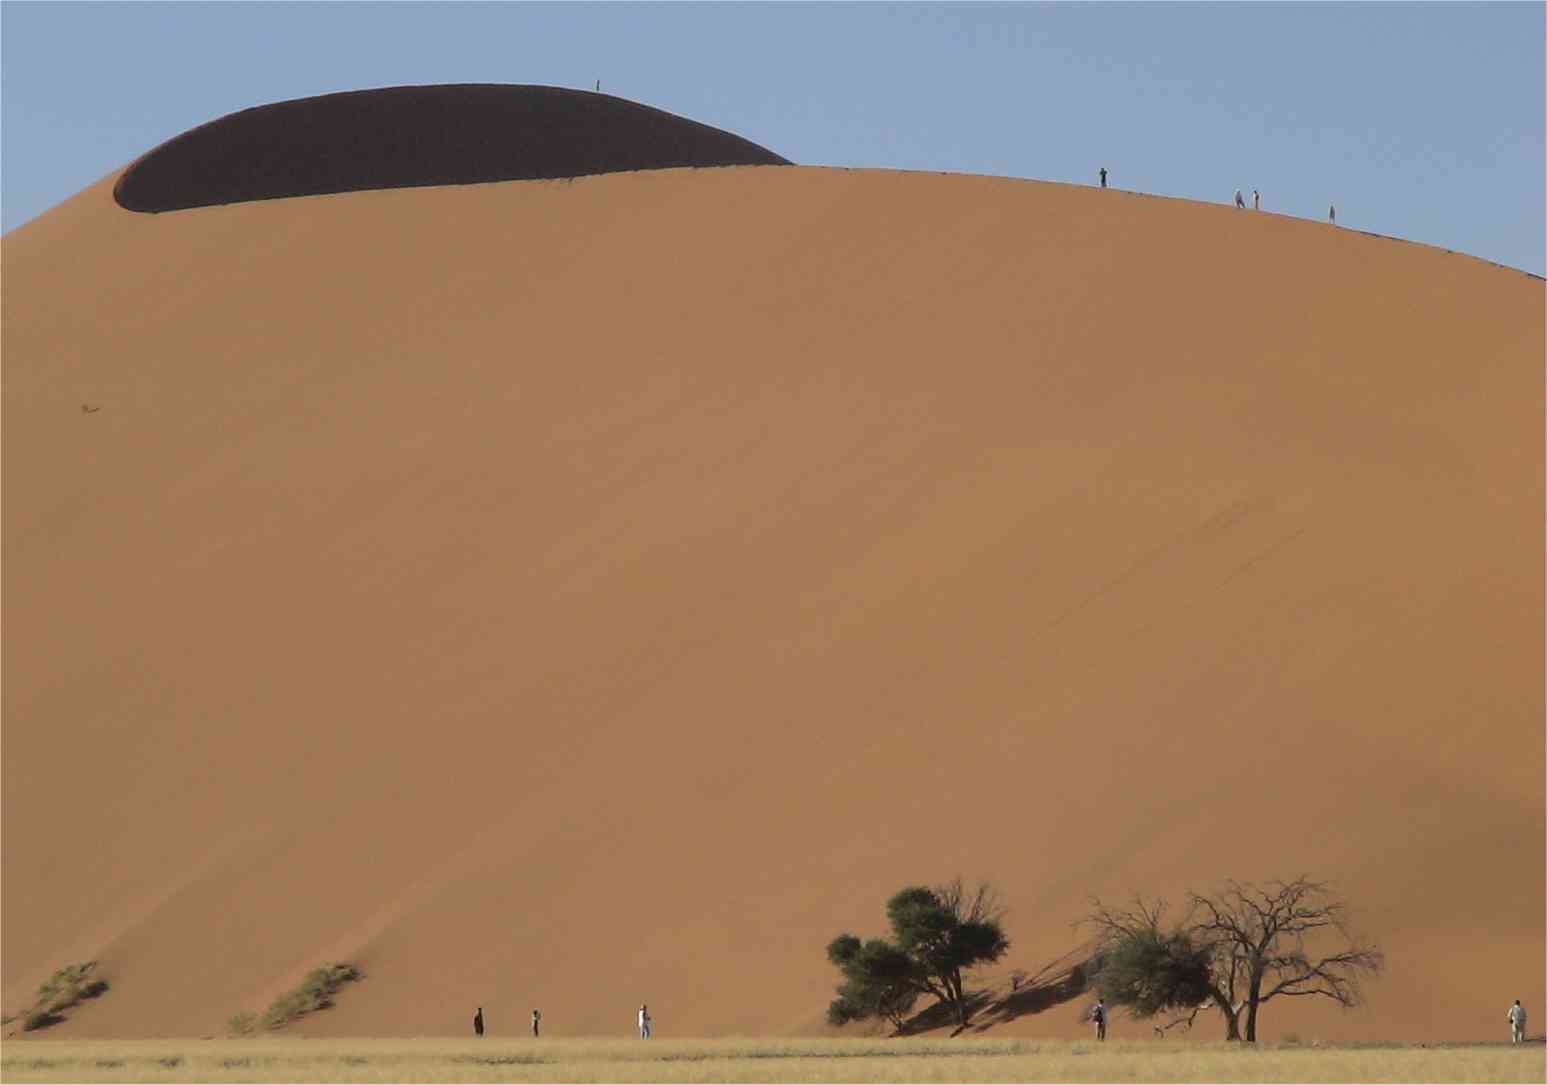 People look like ants on the edge of the dunes.  Photo by FG.